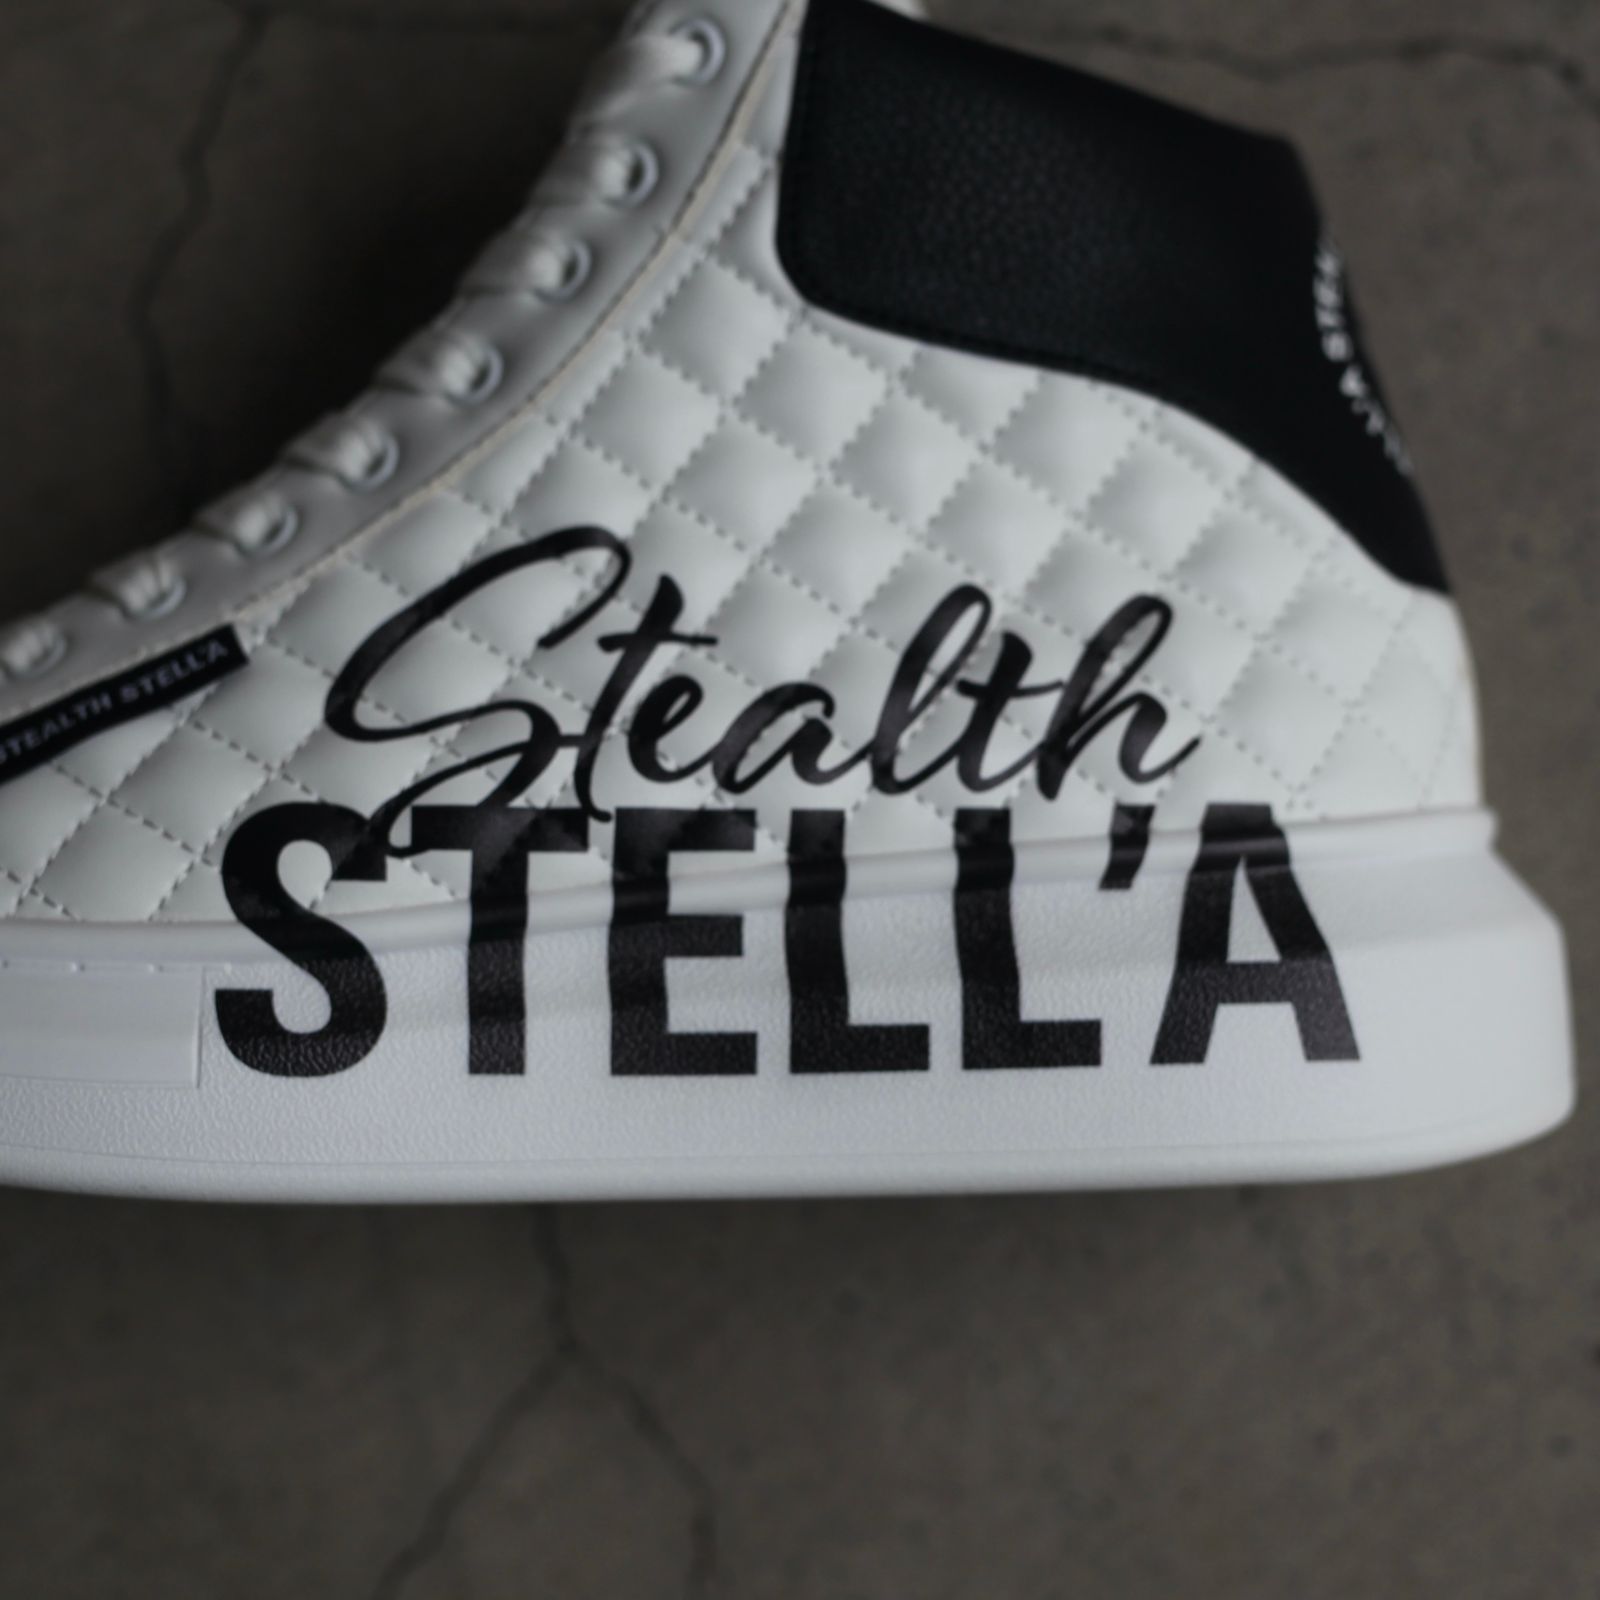 STEALTH STELL'A - 【残り一点】Pro Stell'a | ACRMTSM ONLINE STORE